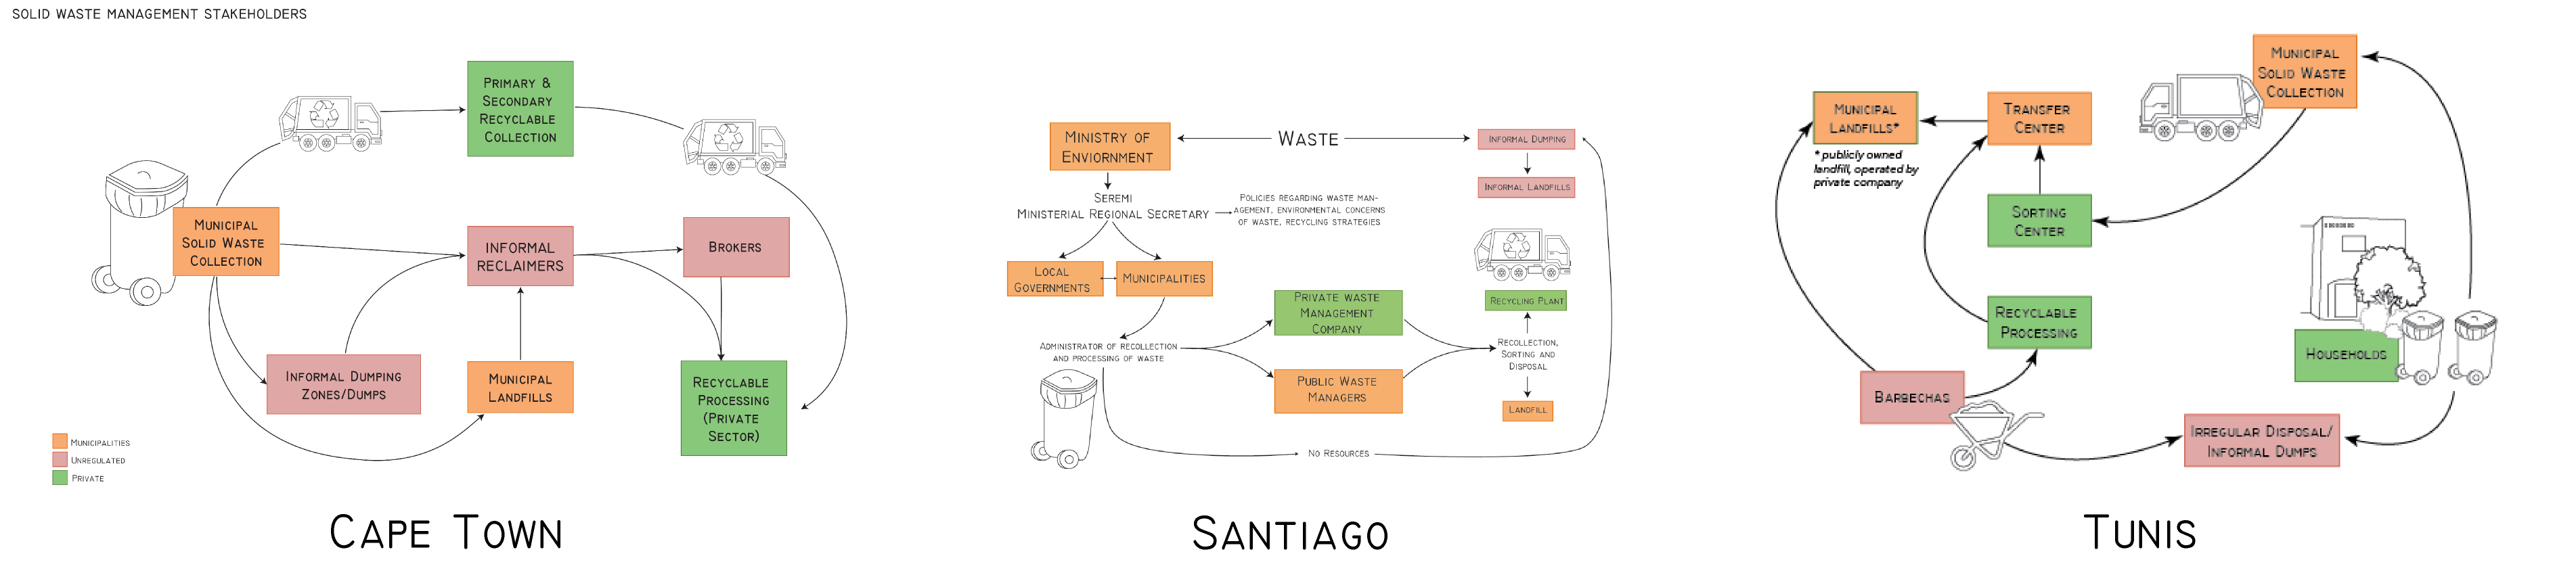 waste management systems in cape town, santiago and tunis